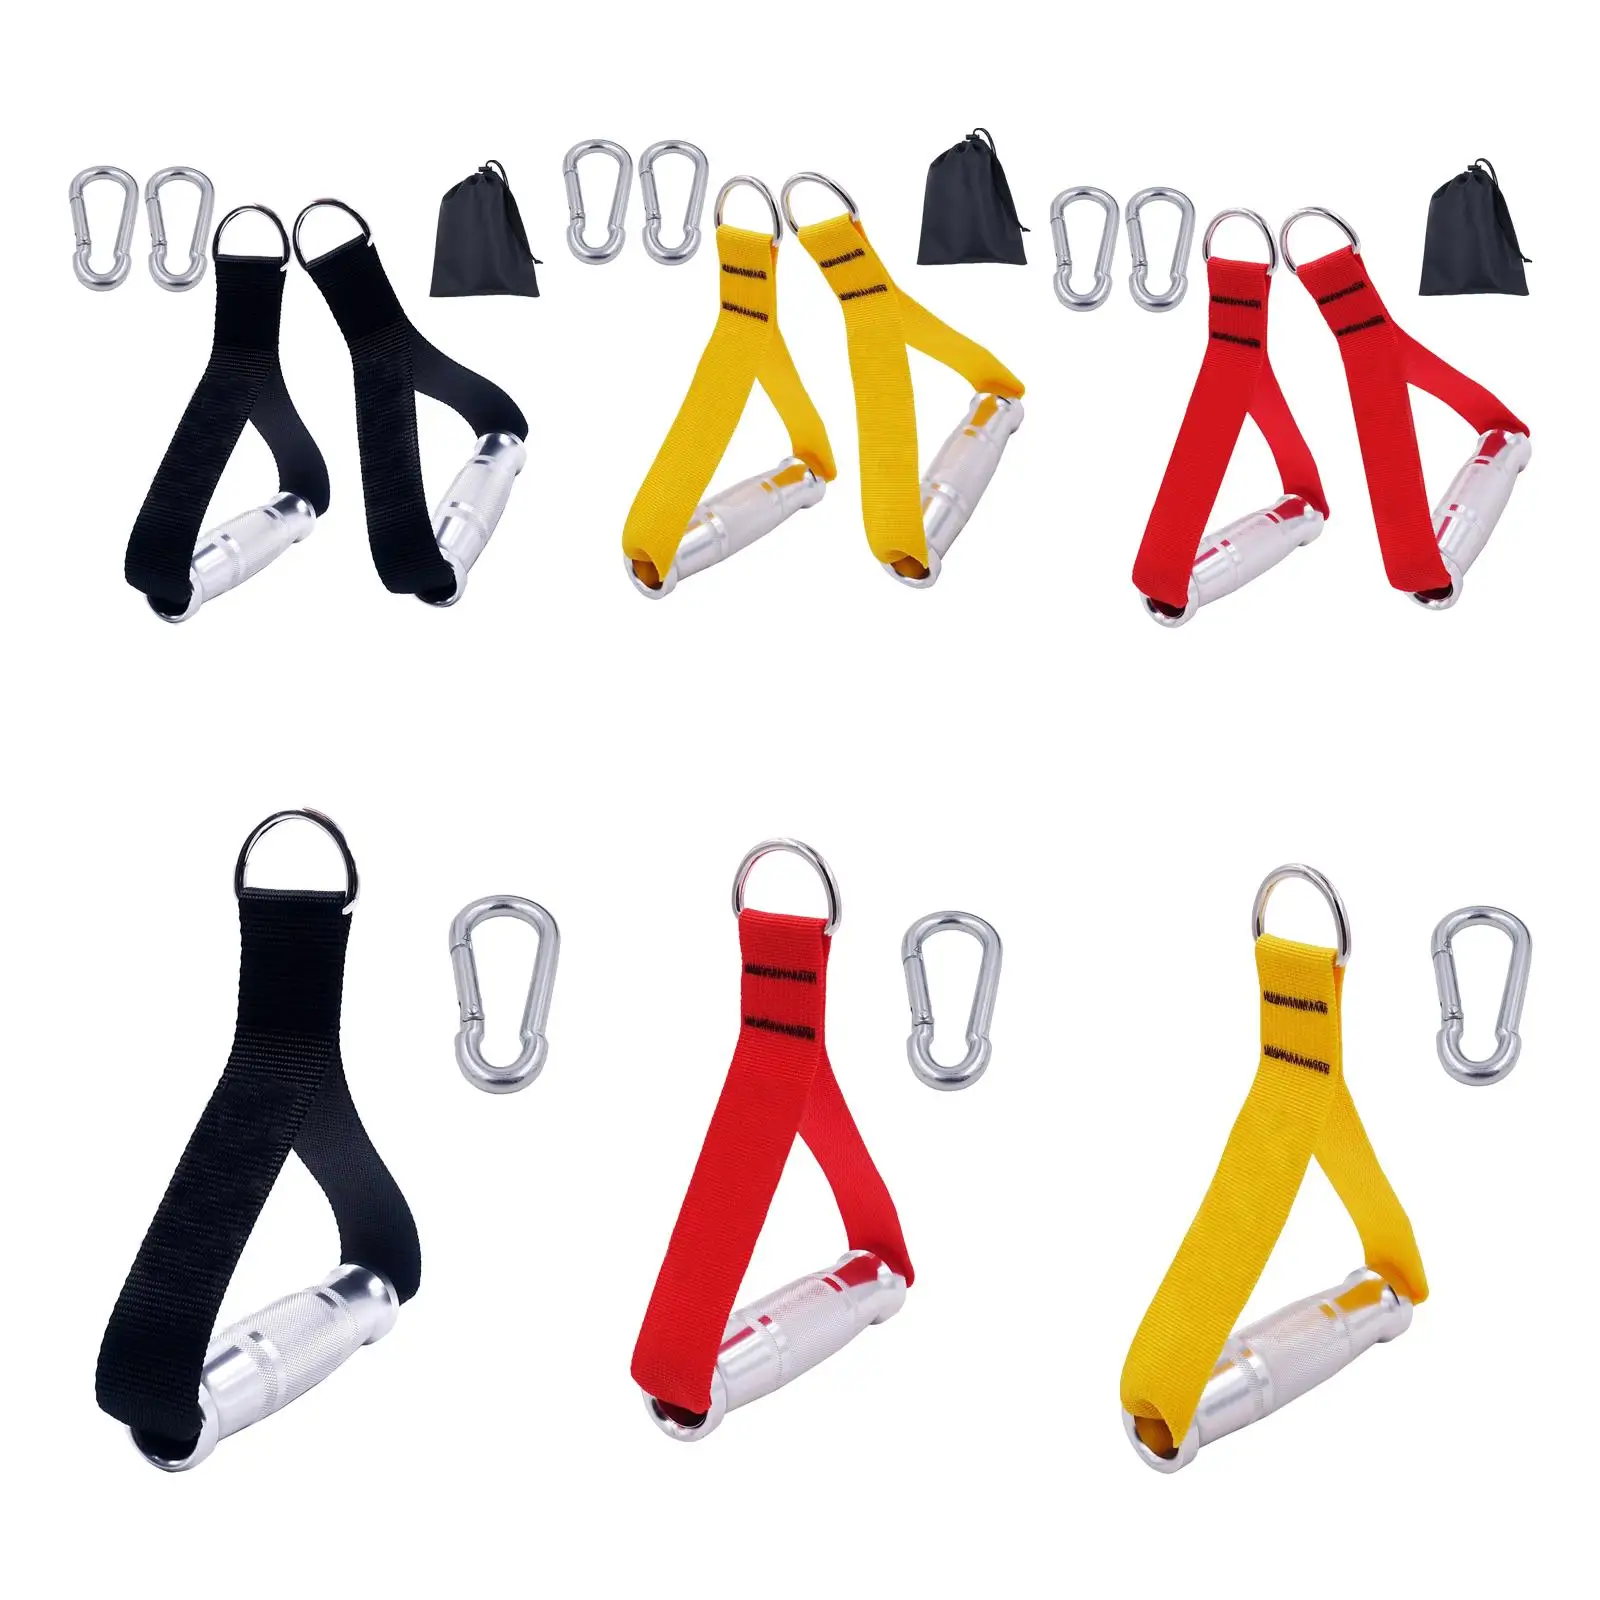 Strong Resistance Bands Handle Strength Training Workout Nylon Webbing Exercise Replacement Cable Machine Attachment Grips